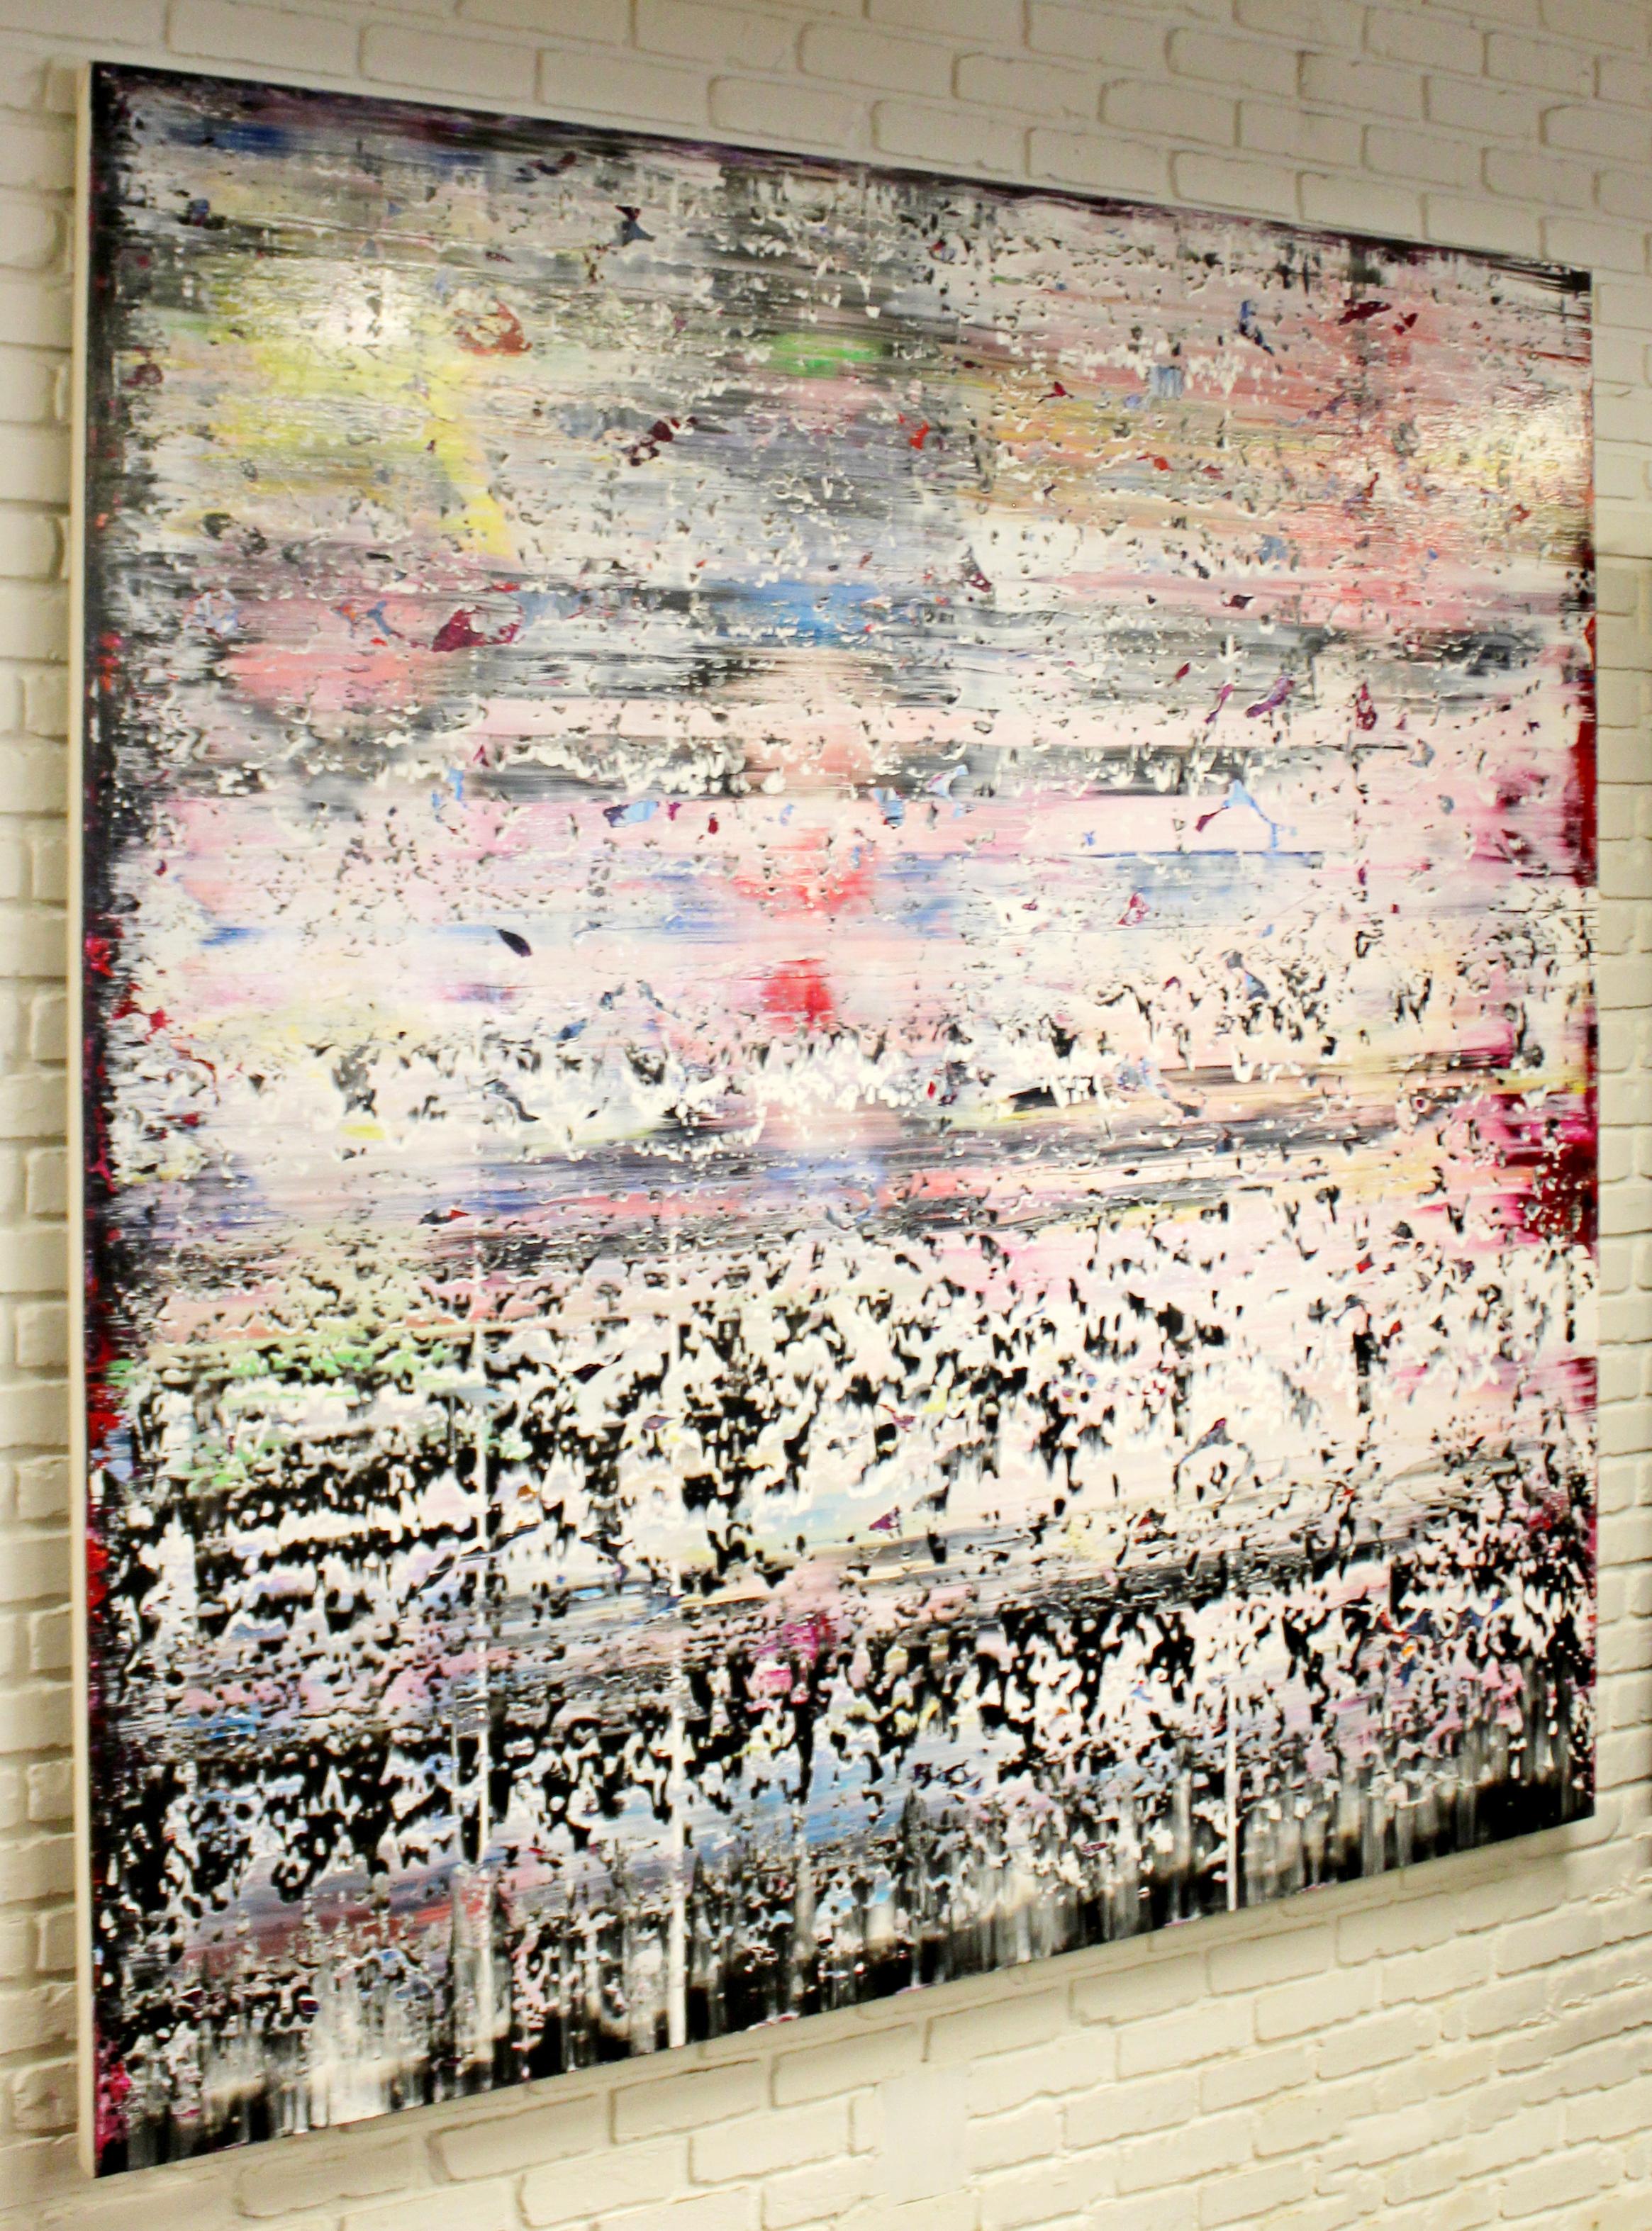 For your consideration is a magnificent and massive, abstract, acrylic on canvas painting, entitled 